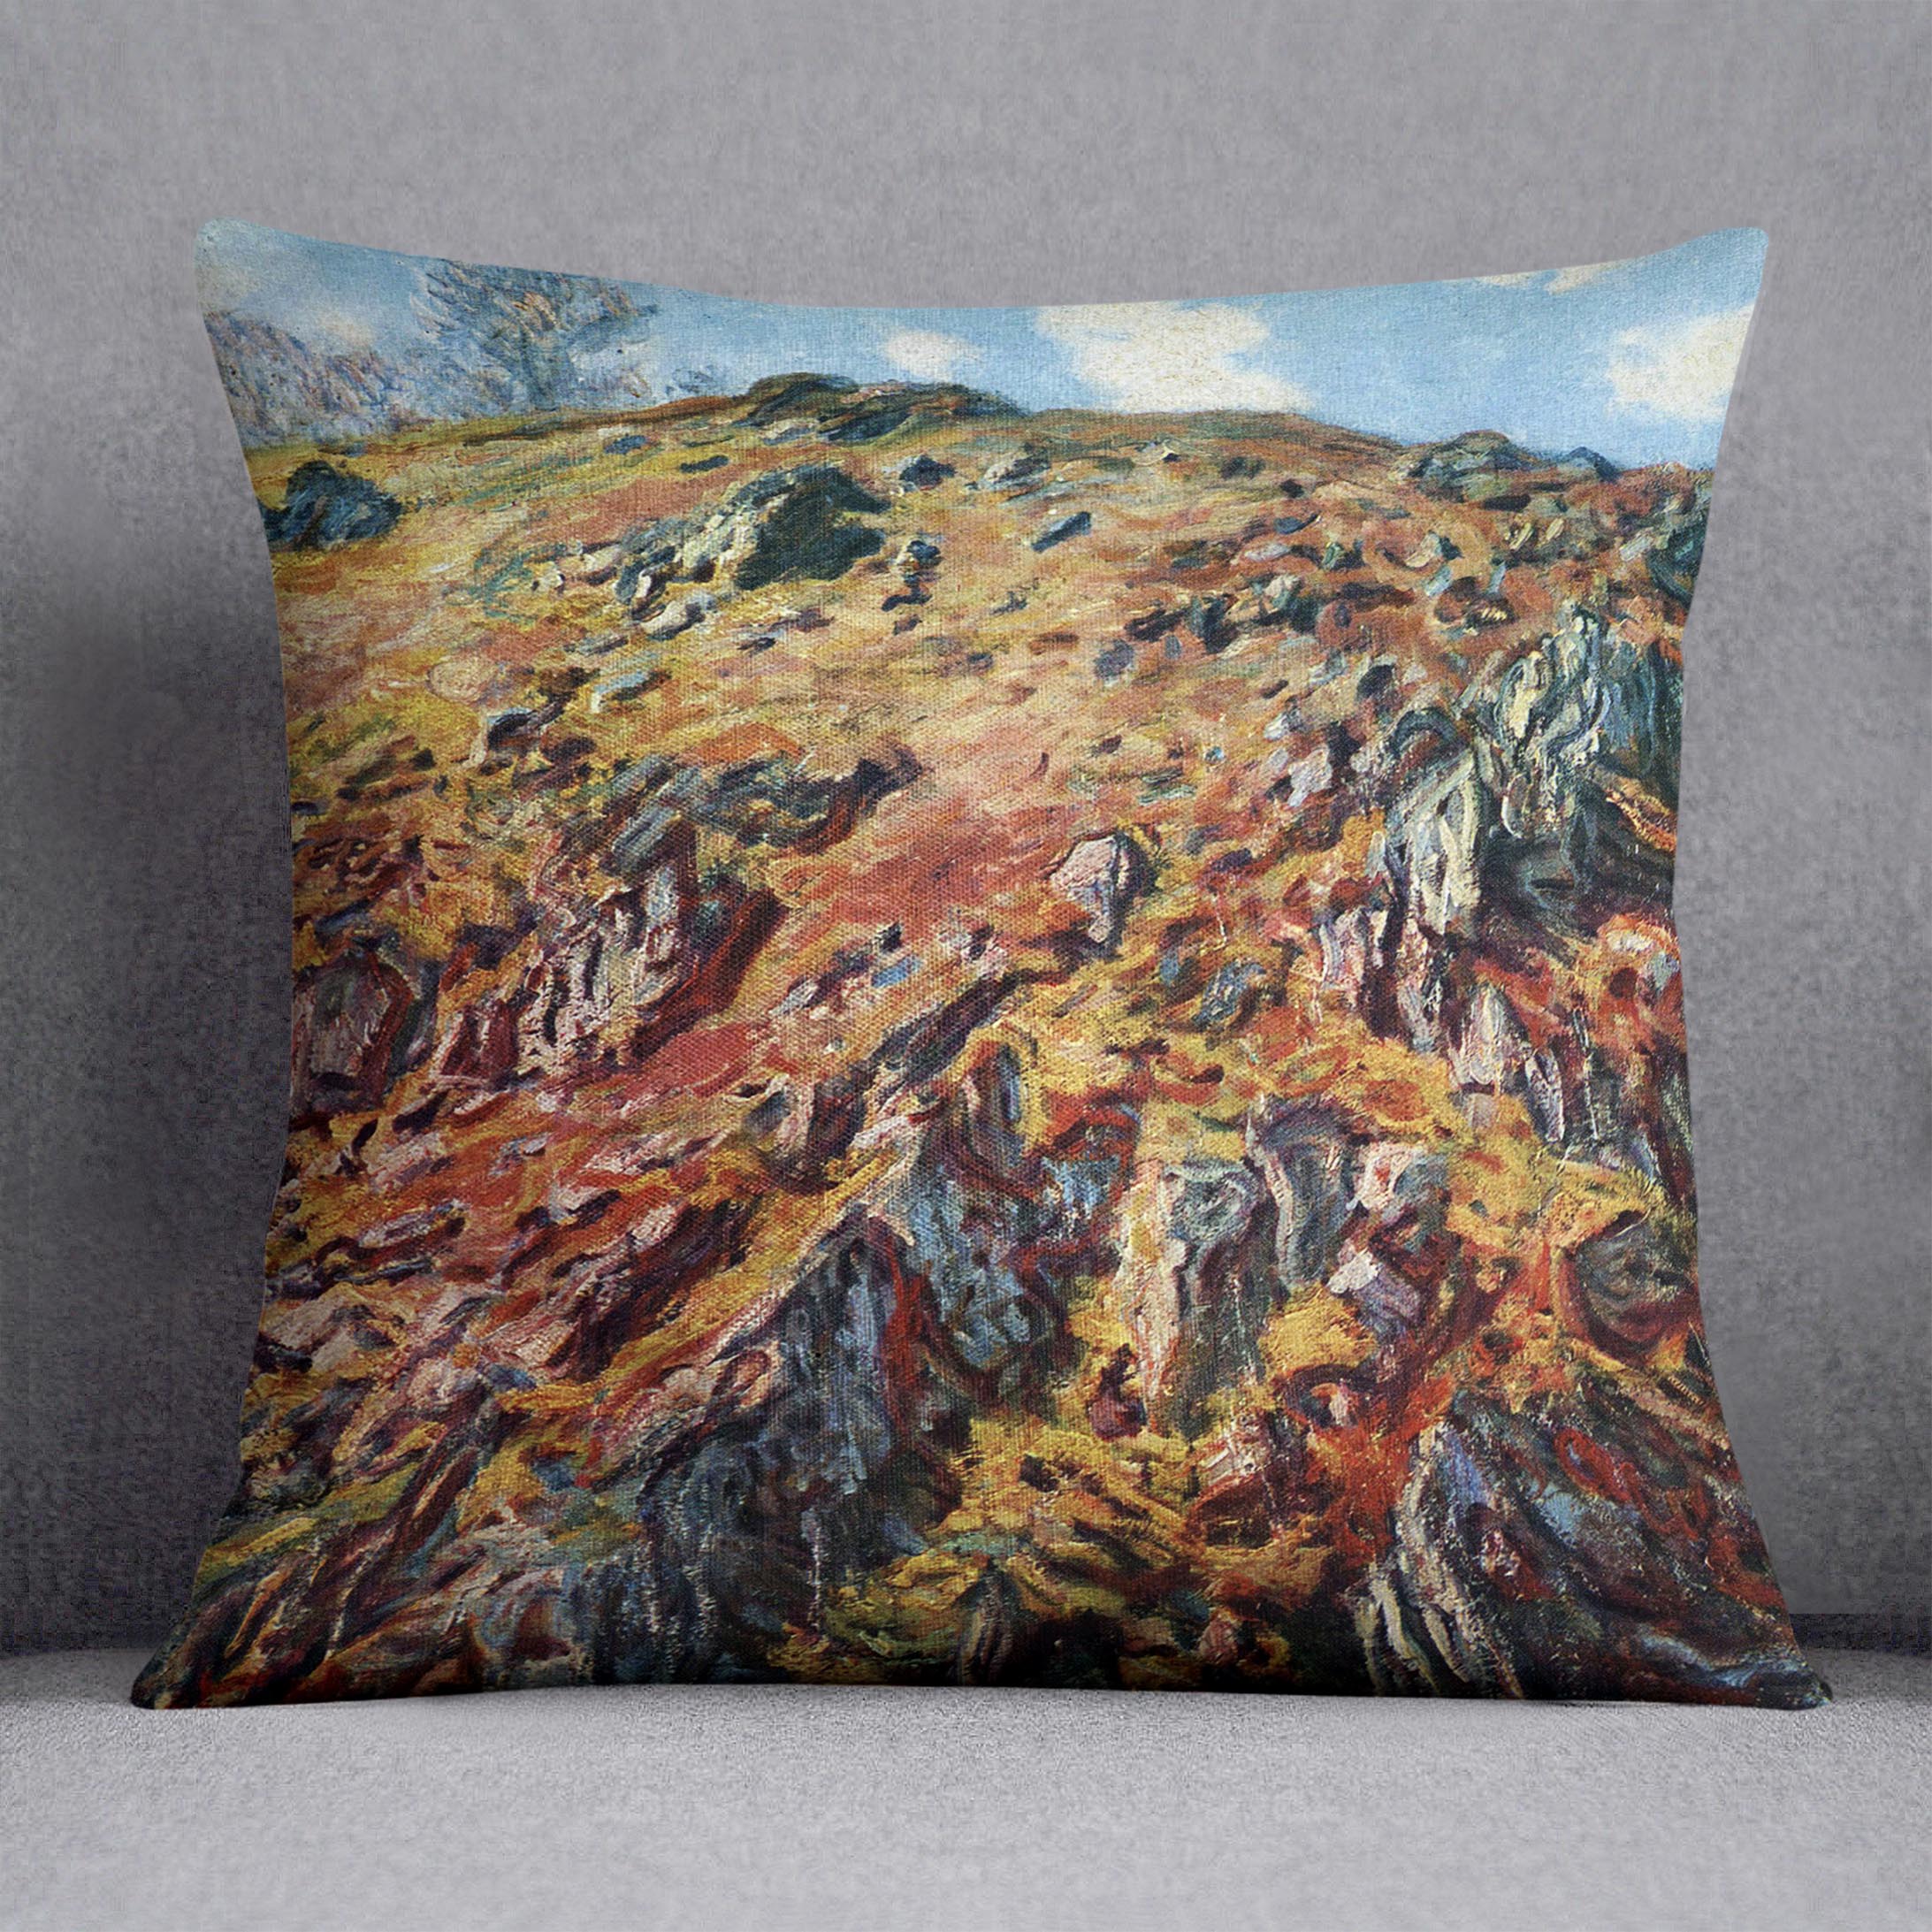 The boulder by Monet Cushion